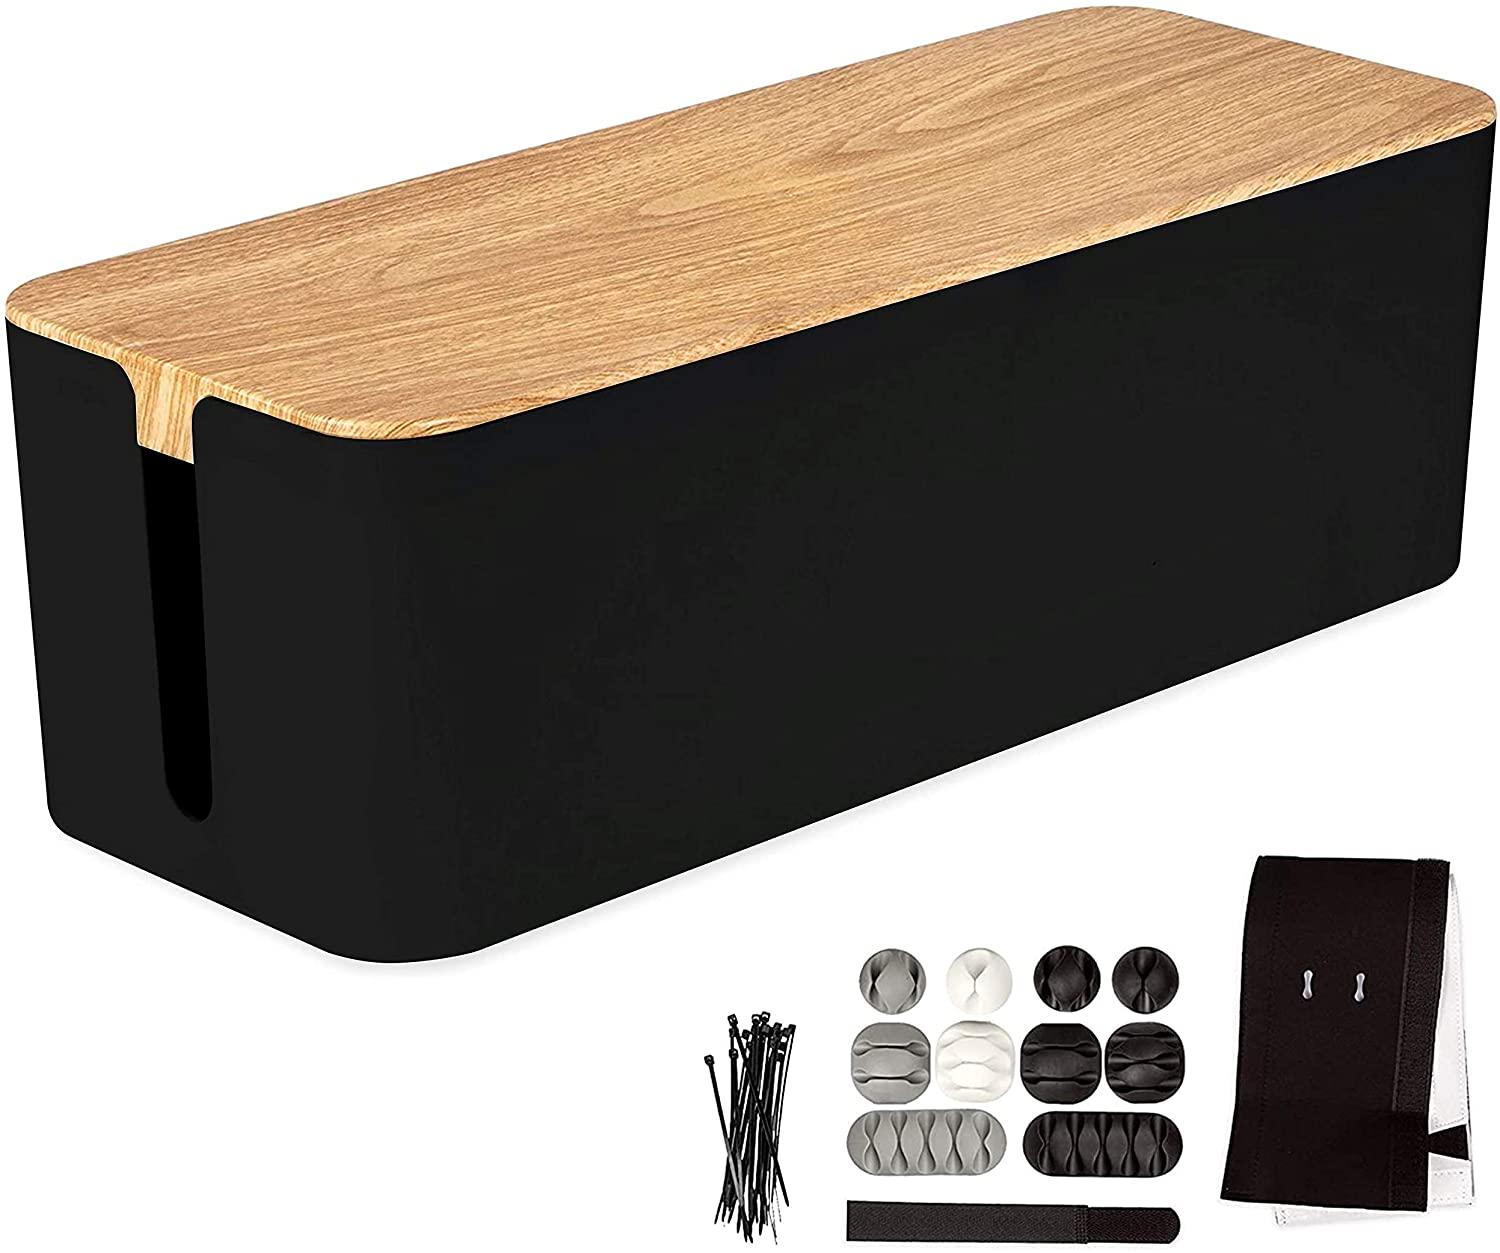 Large Cable Management Box - Black Cord Organizer with Wood Print